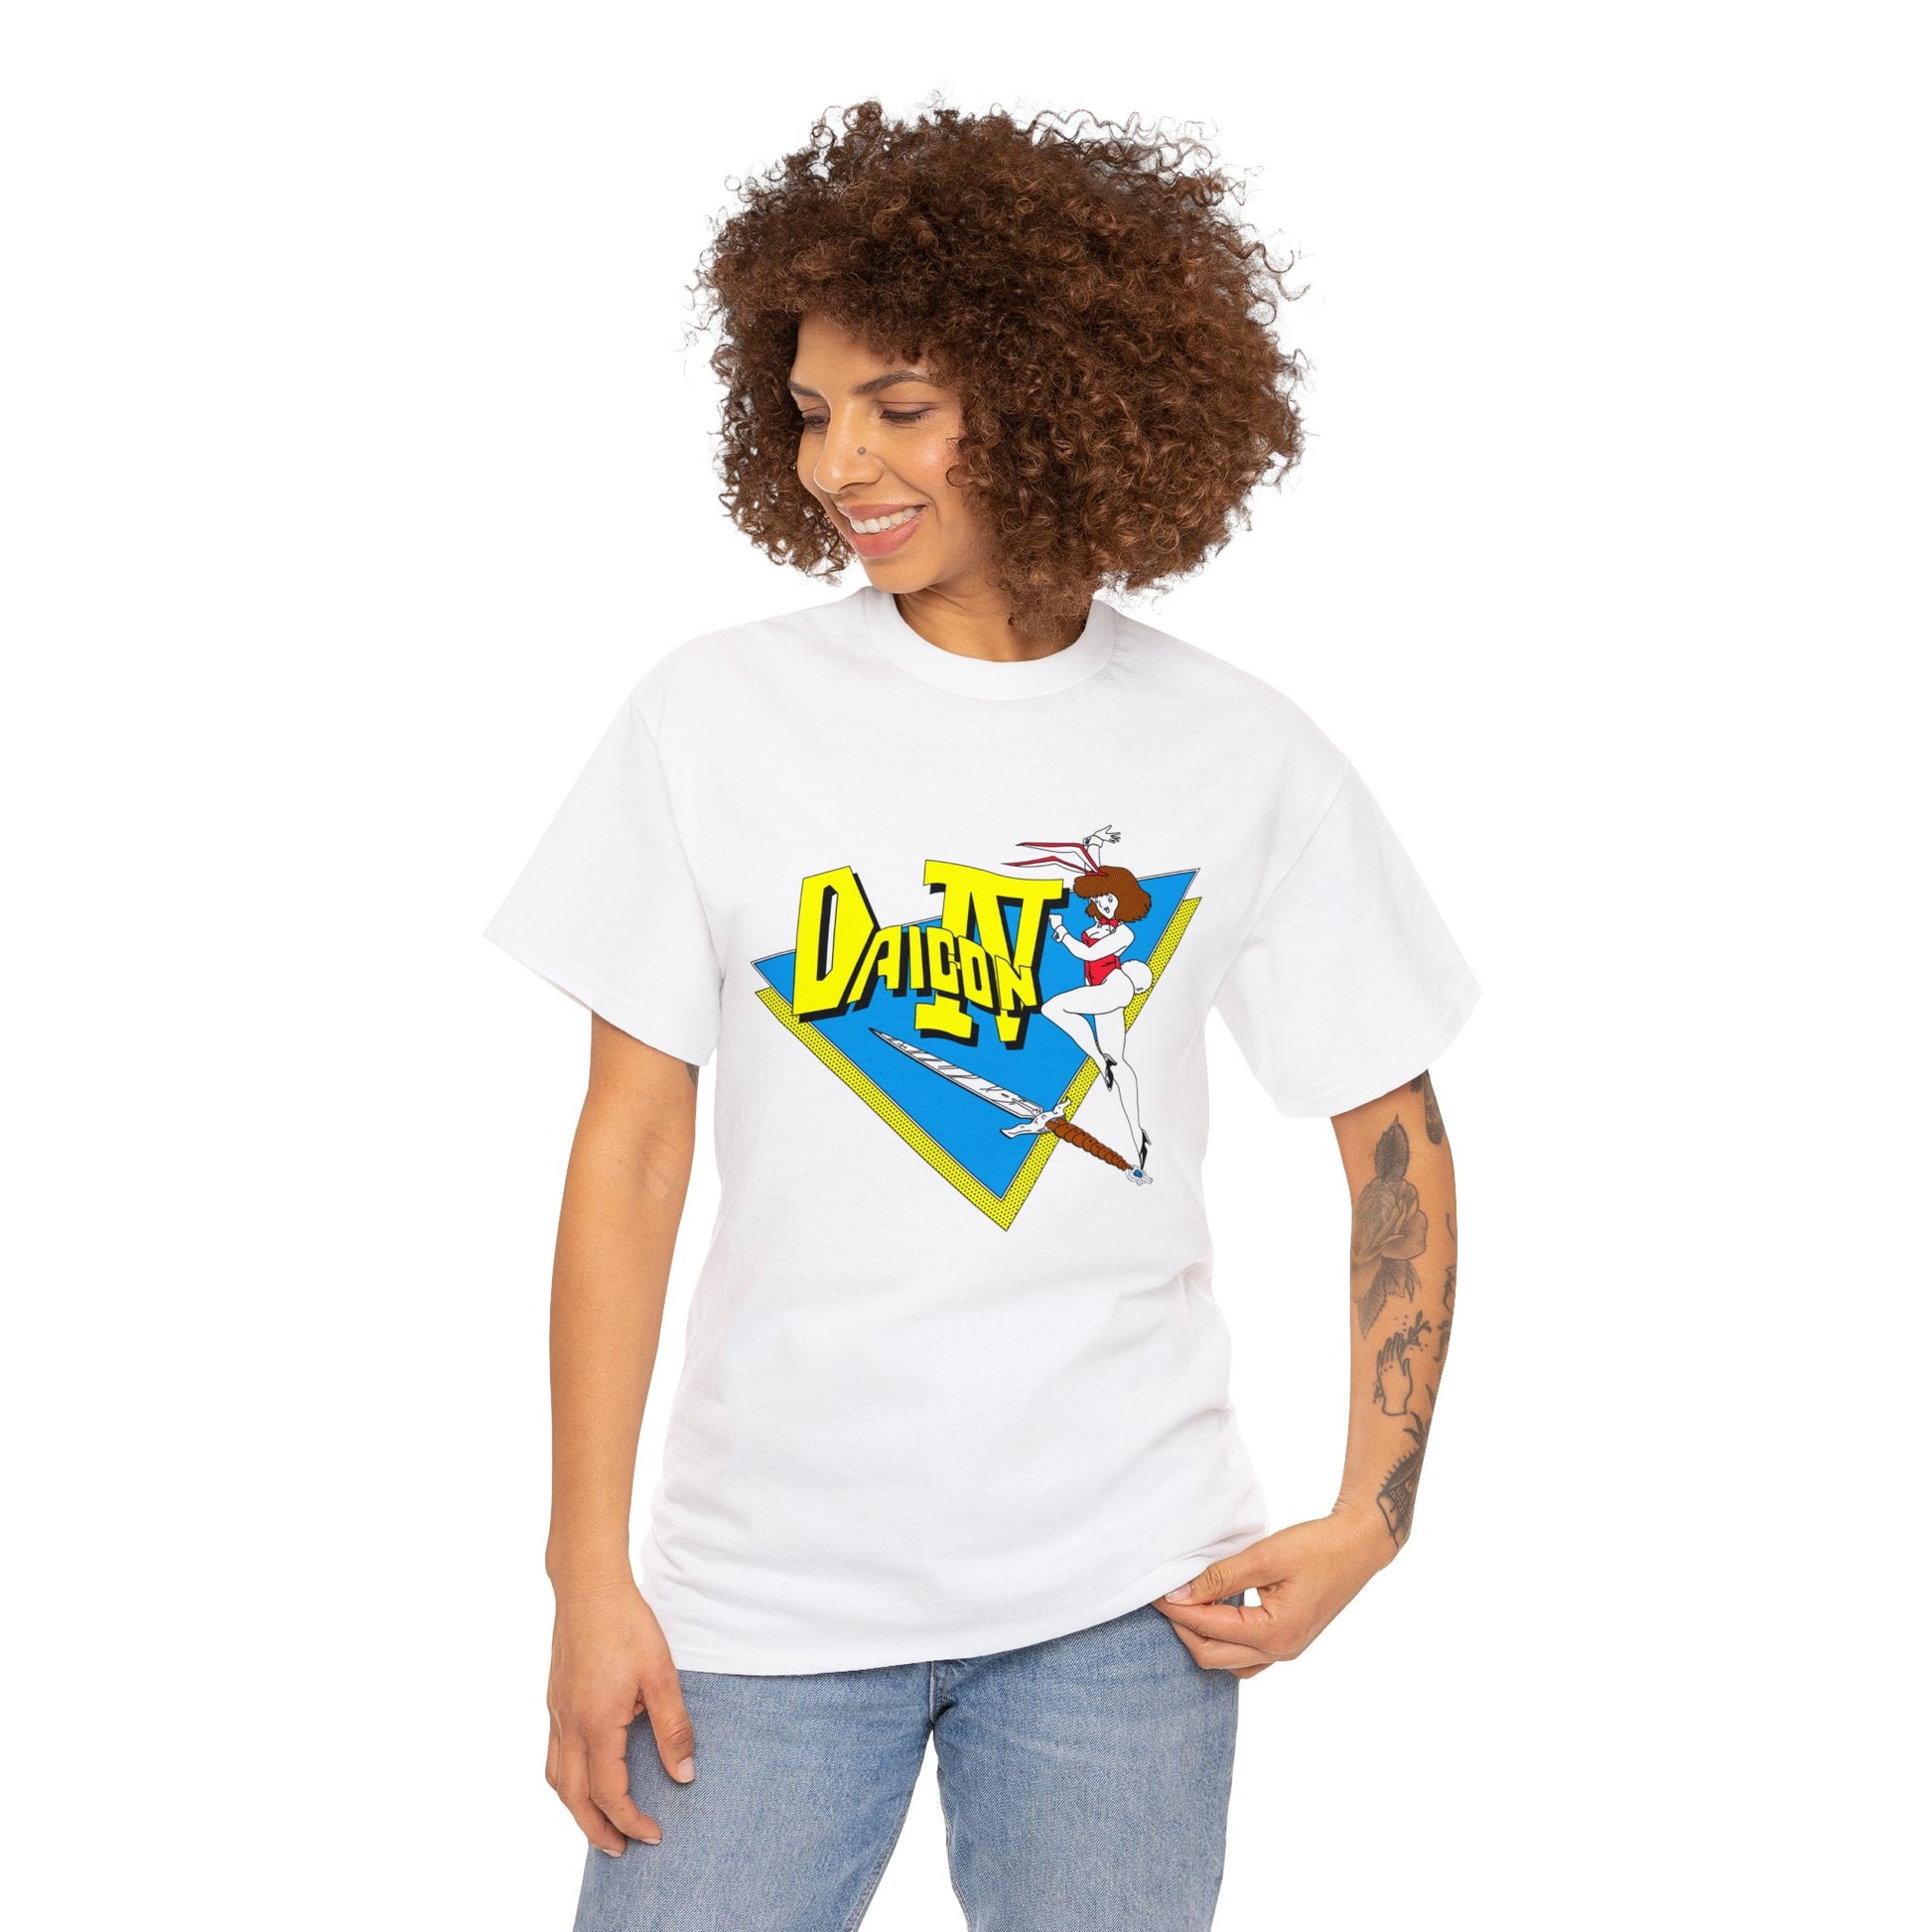 DAICON IV Anime Films 80s T-shirt for Sale